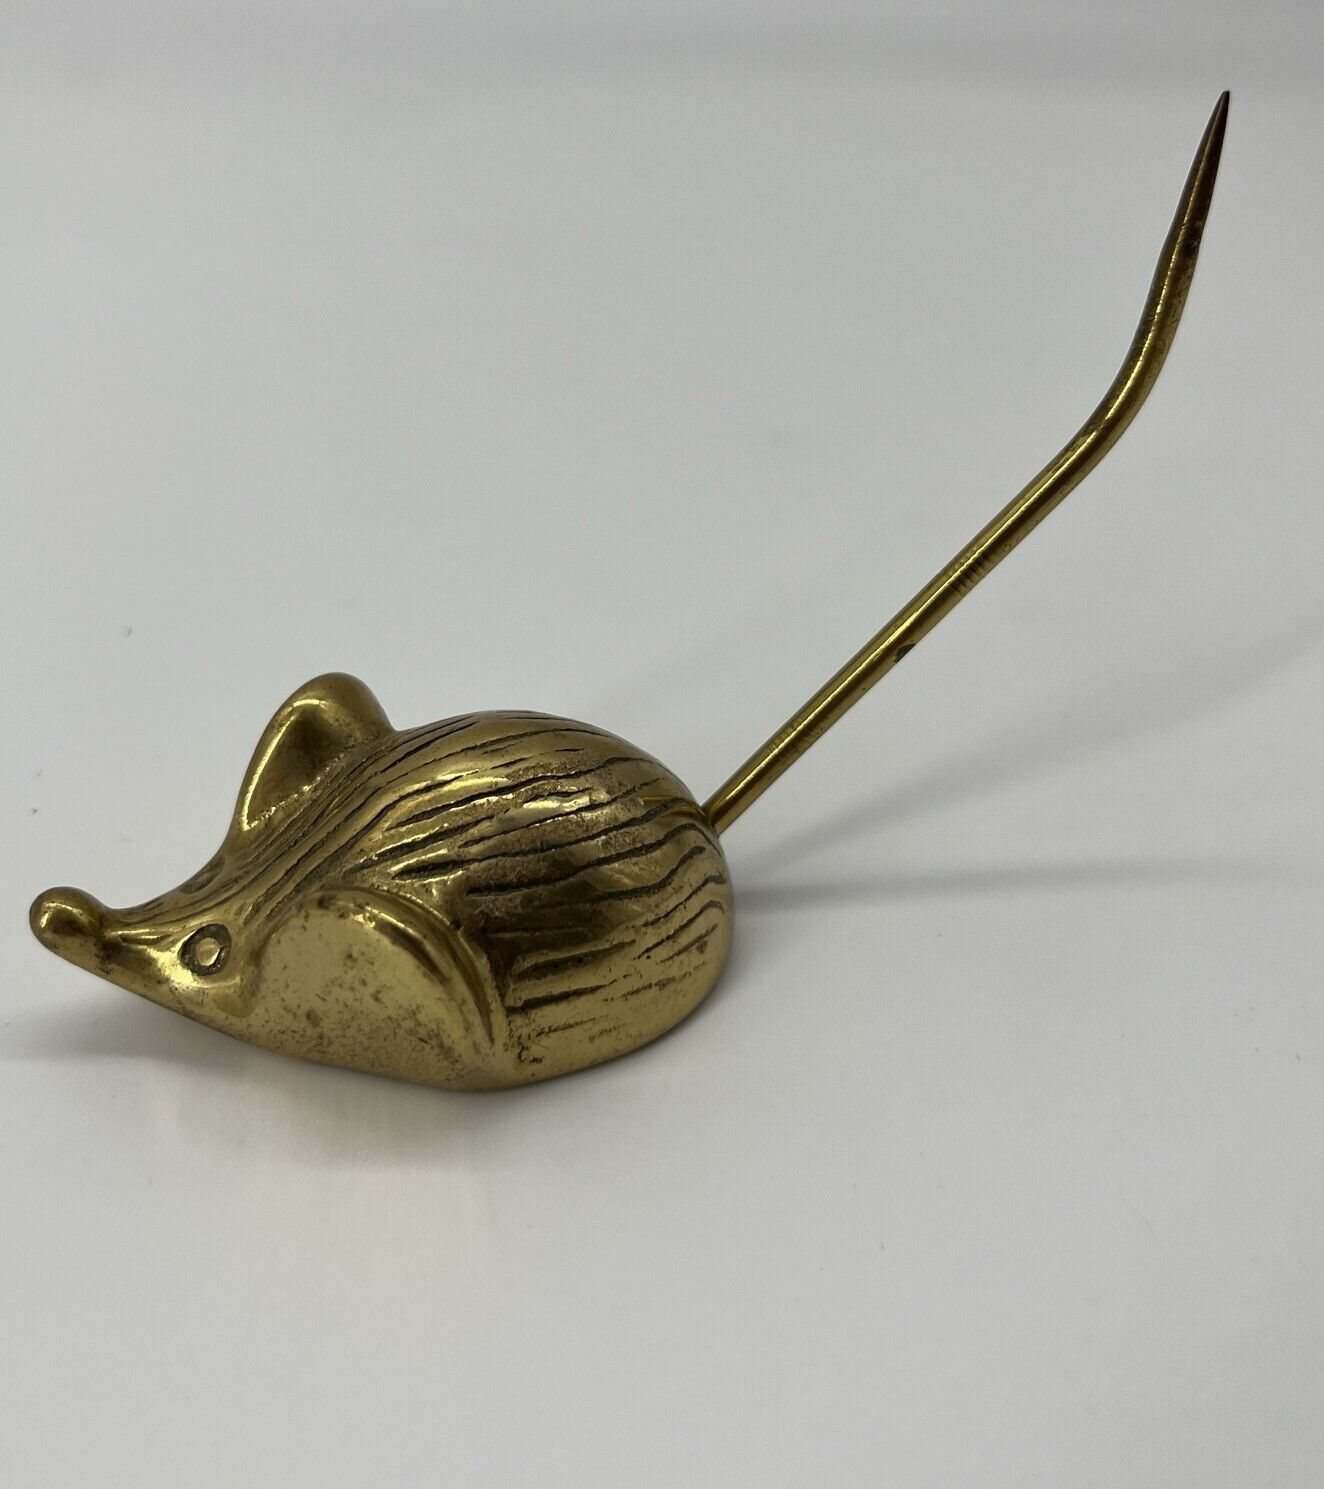 Vintage Brass Mouse with Long Spiked Tail Perfect for Memos and Receipts Holding